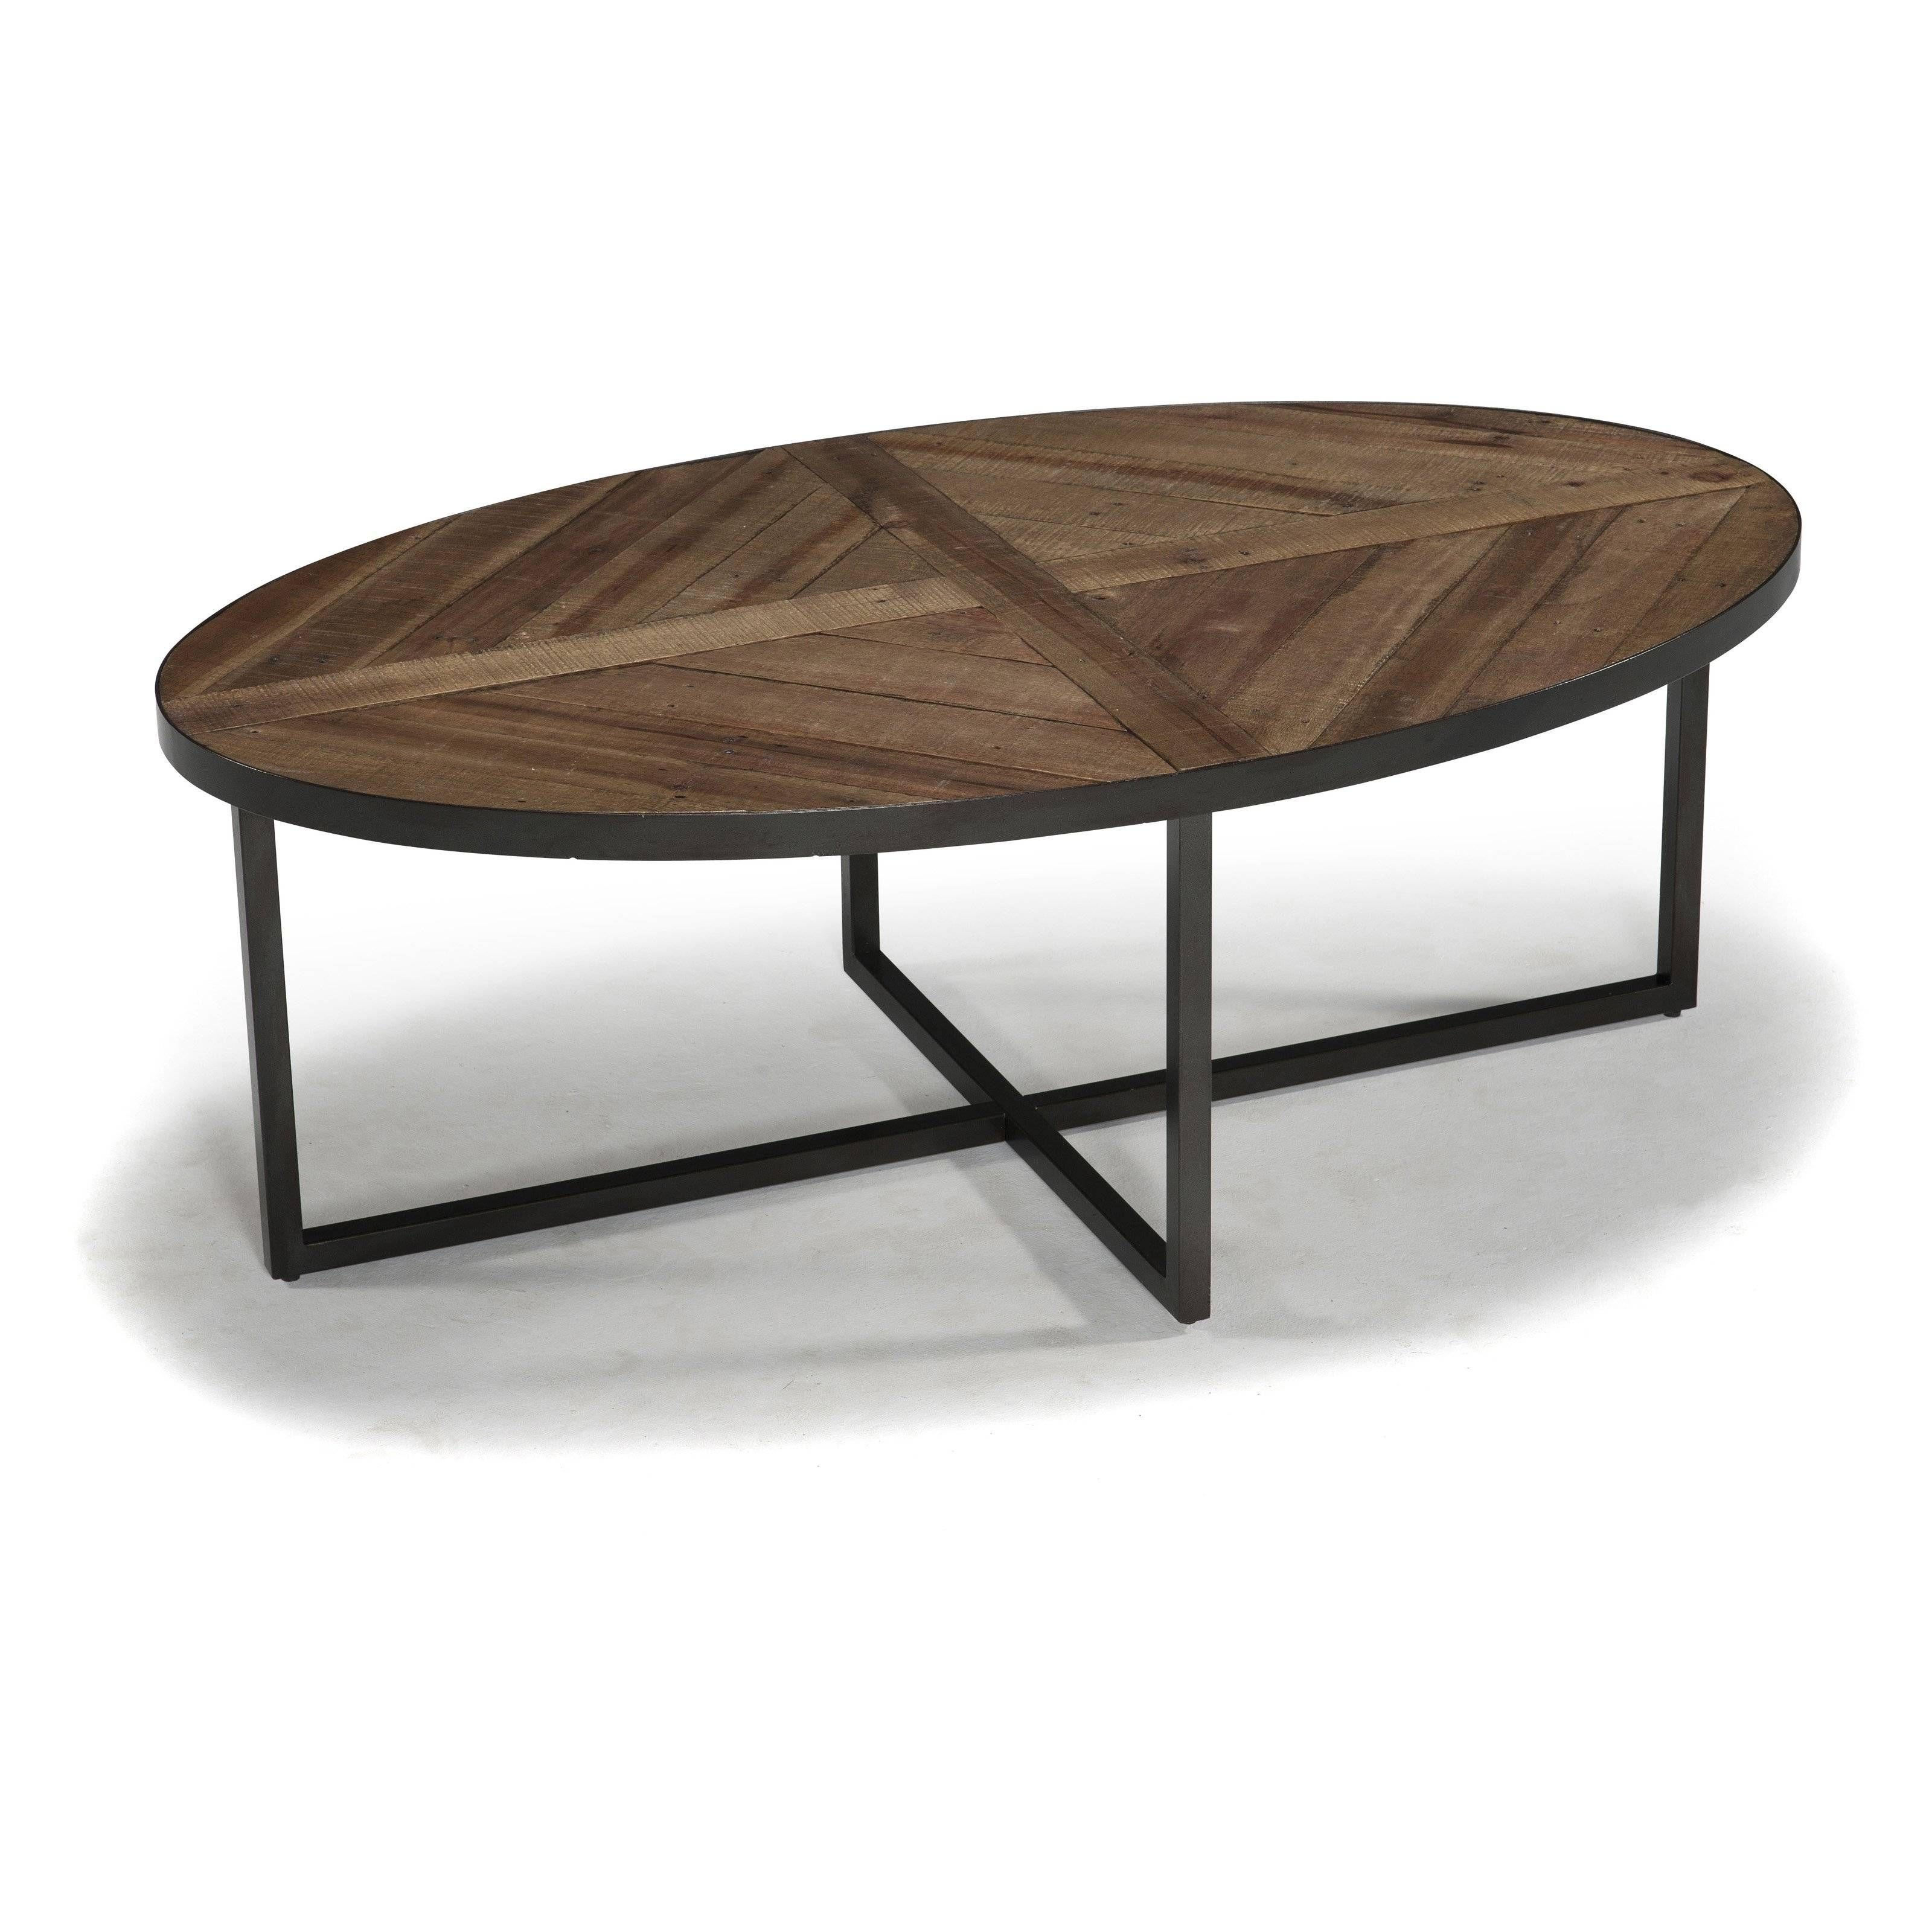 The Most Beautiful Oval Wood Coffee Table | Coffe Table Galleryx Pertaining To Metal Oval Coffee Tables (View 8 of 15)